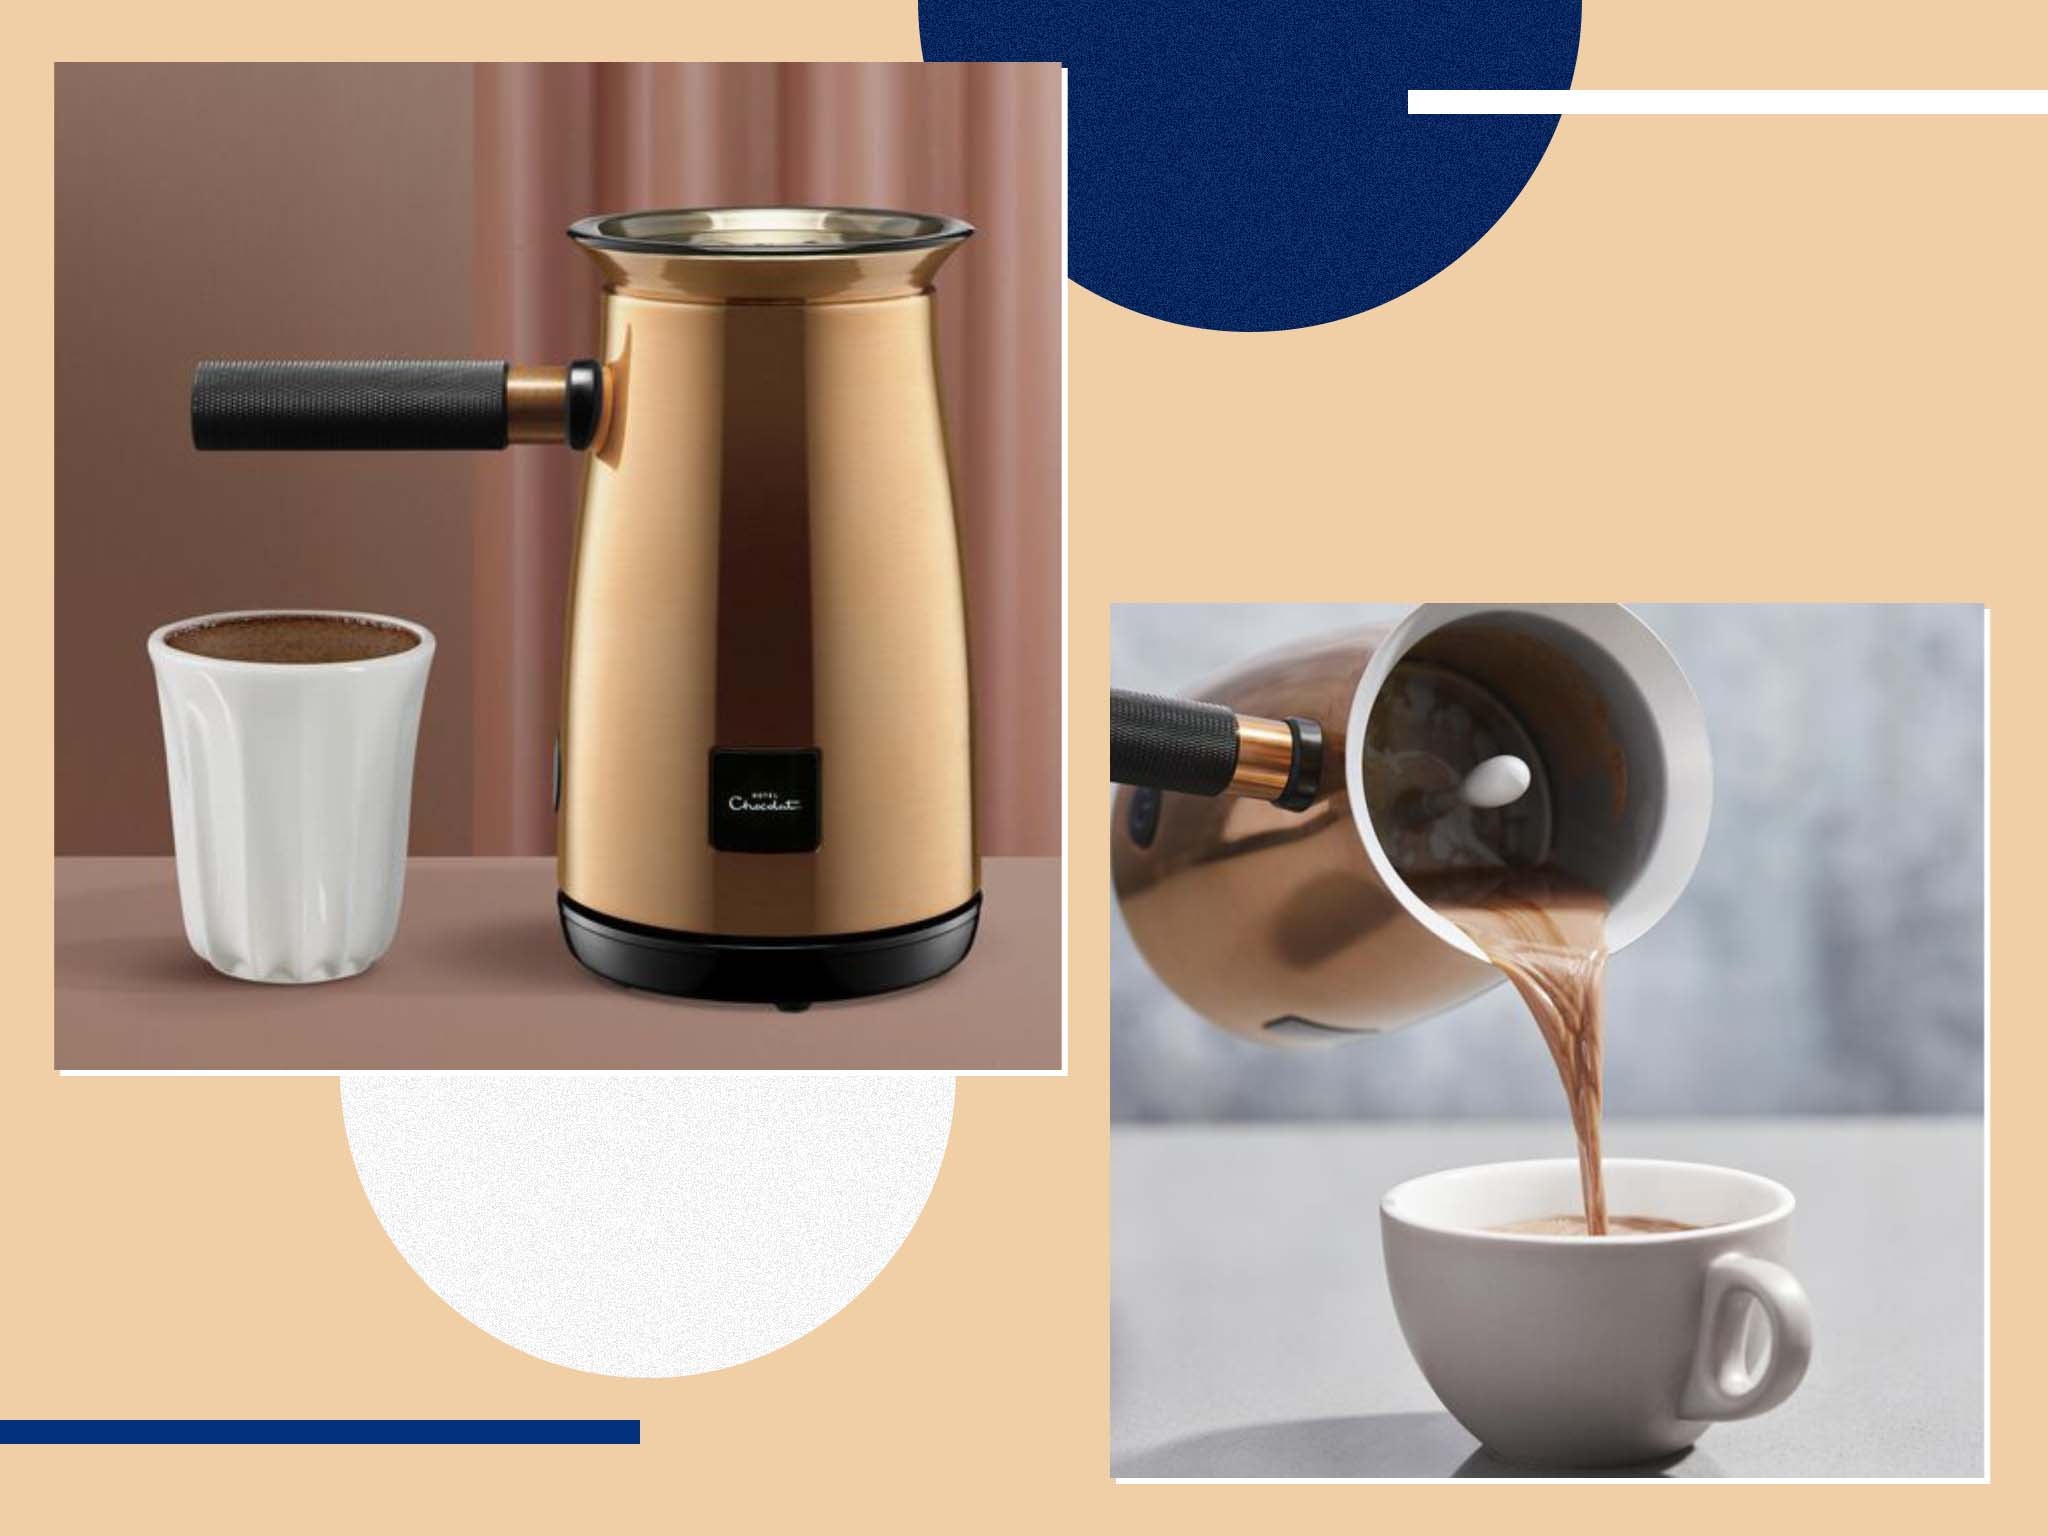 The velvetiser promises to give your hot chocolate a silky consistency with a frothy top